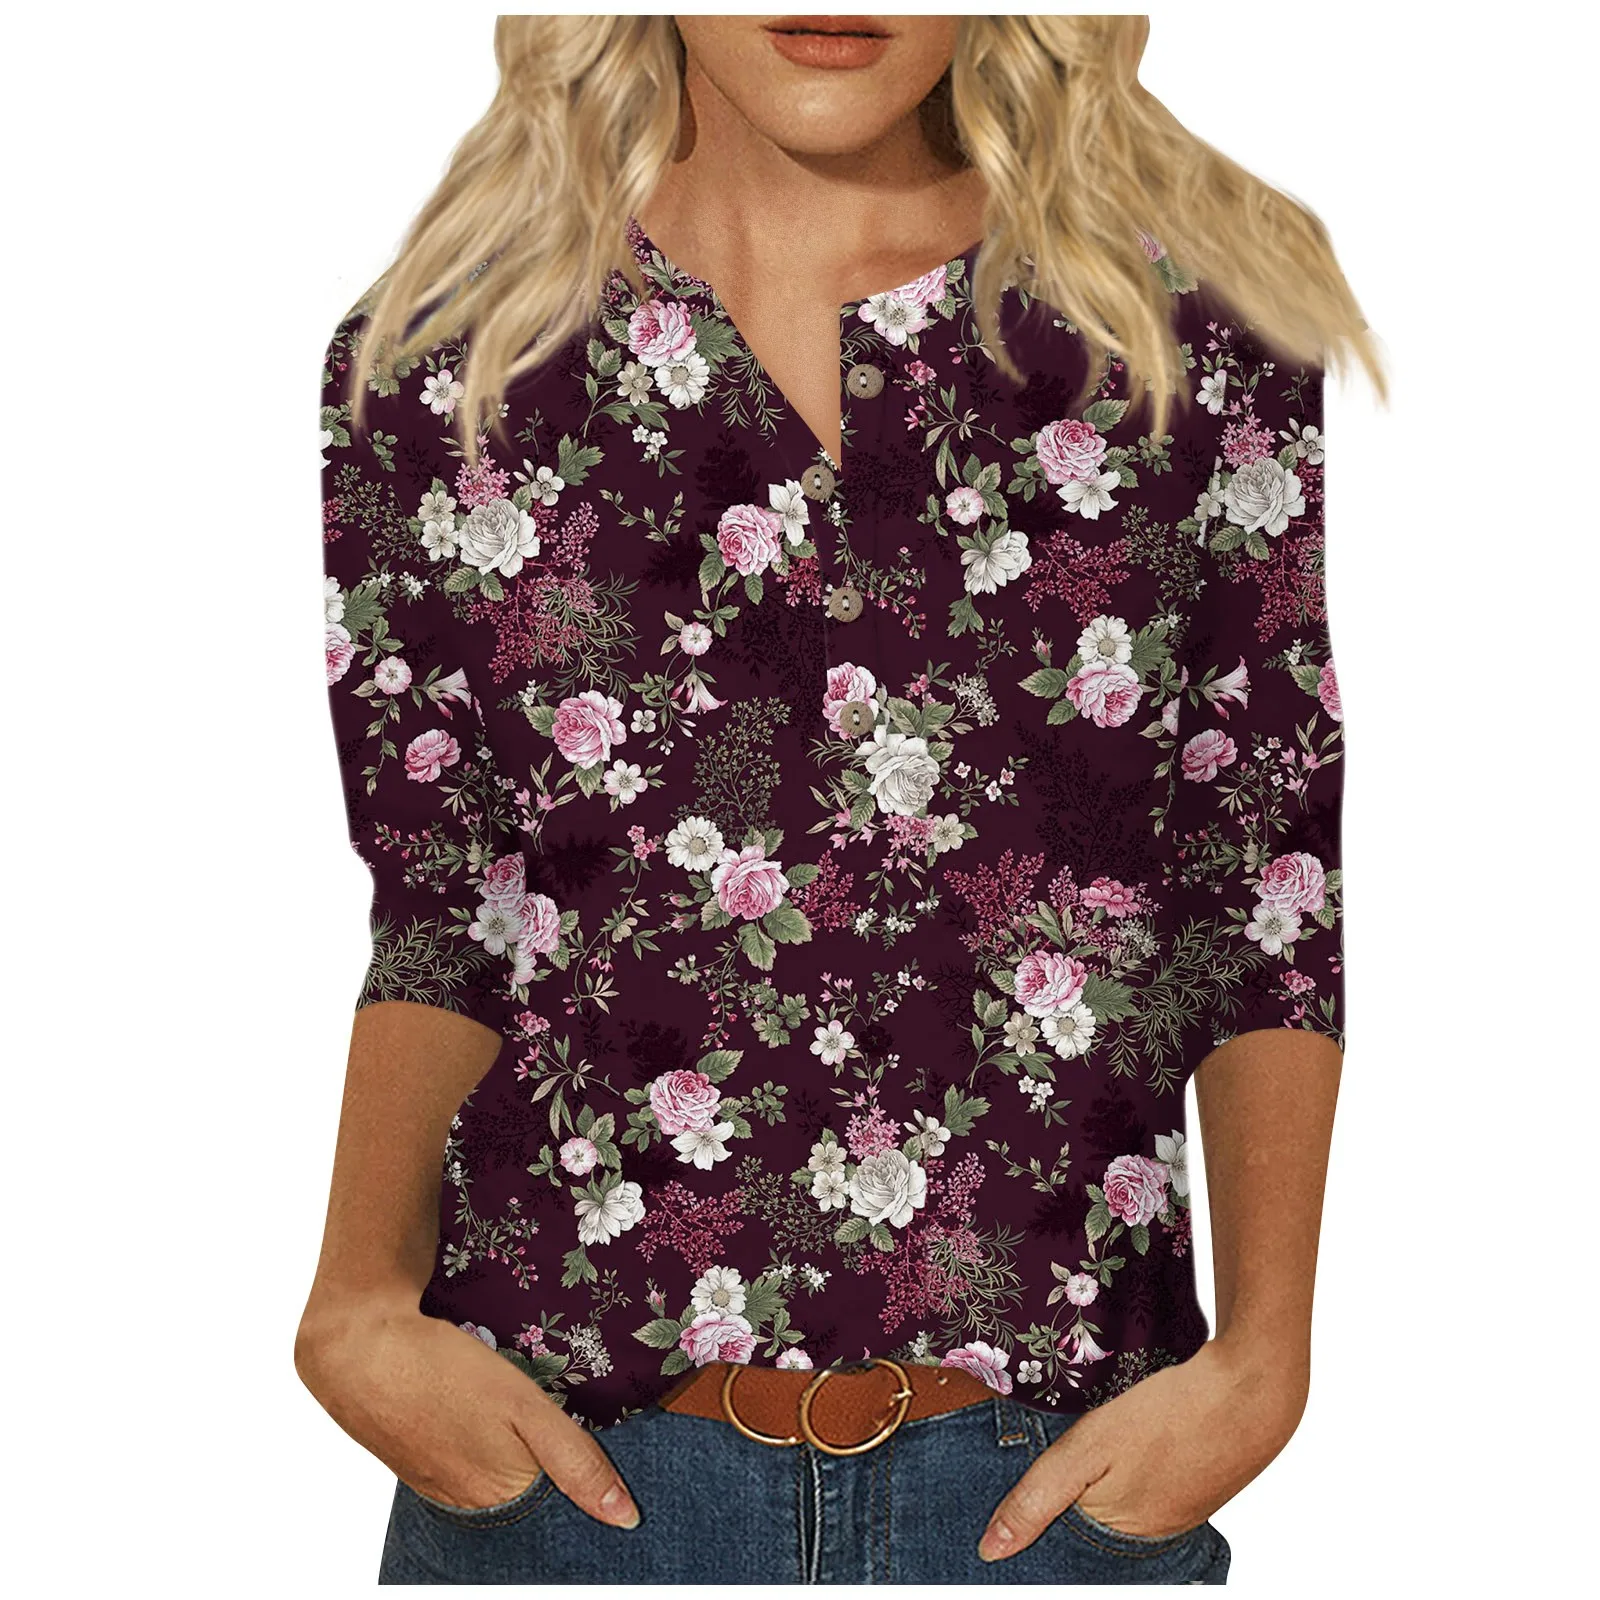 

Blusas Feminino Elegant Sleeve Shirts For Women Cute Flowers Print Graphic Tees Blouses Casual Plus Size Basic Tops Pullover